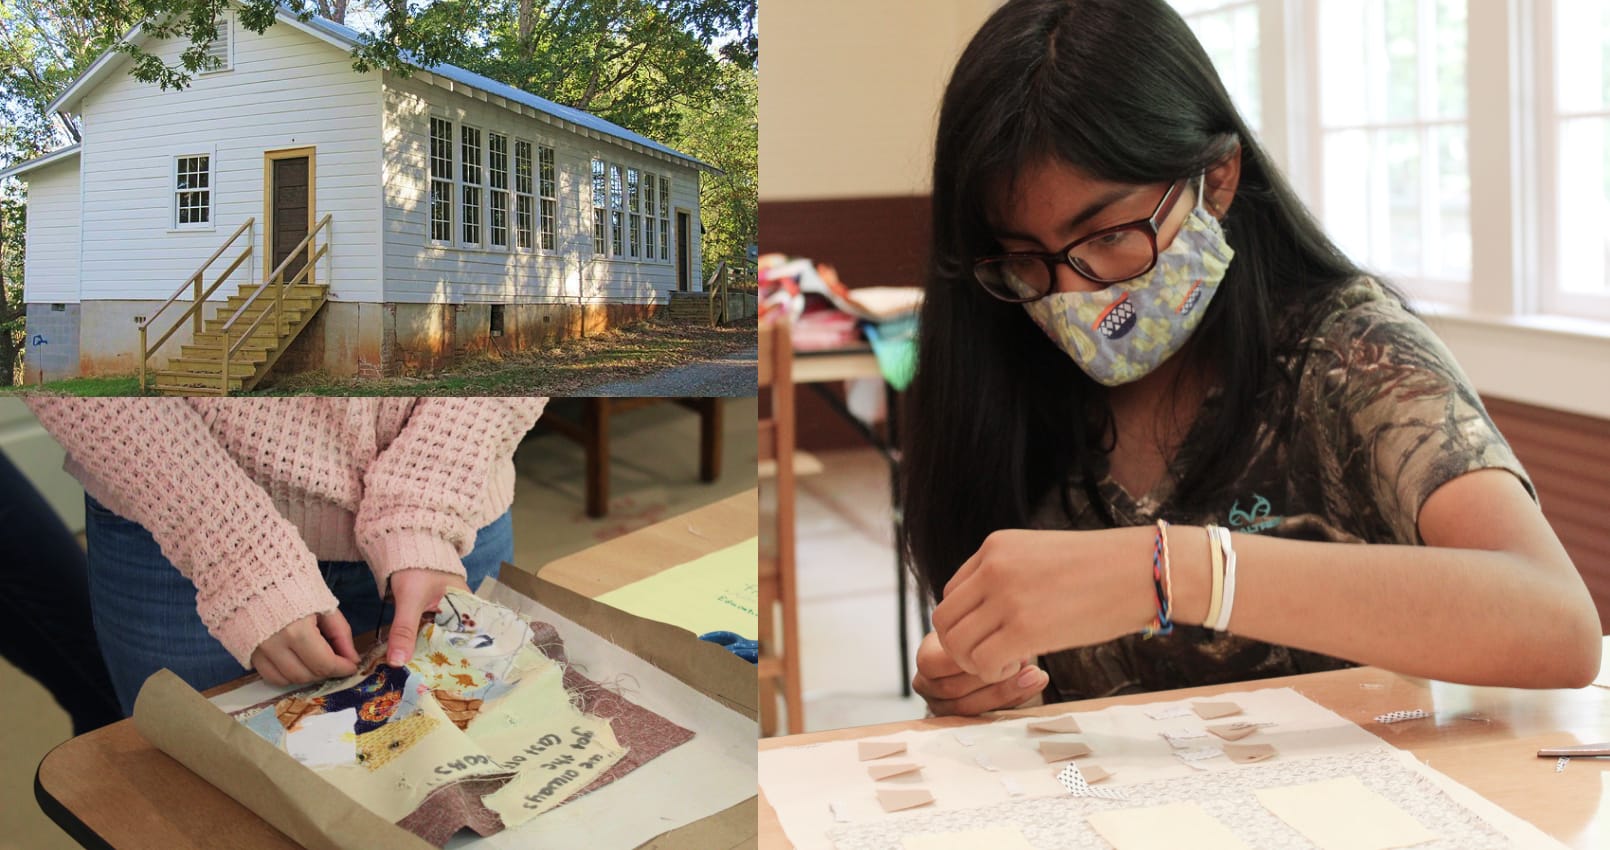 An image collage showing the Rosenwald school and two girls working on their quilt squares